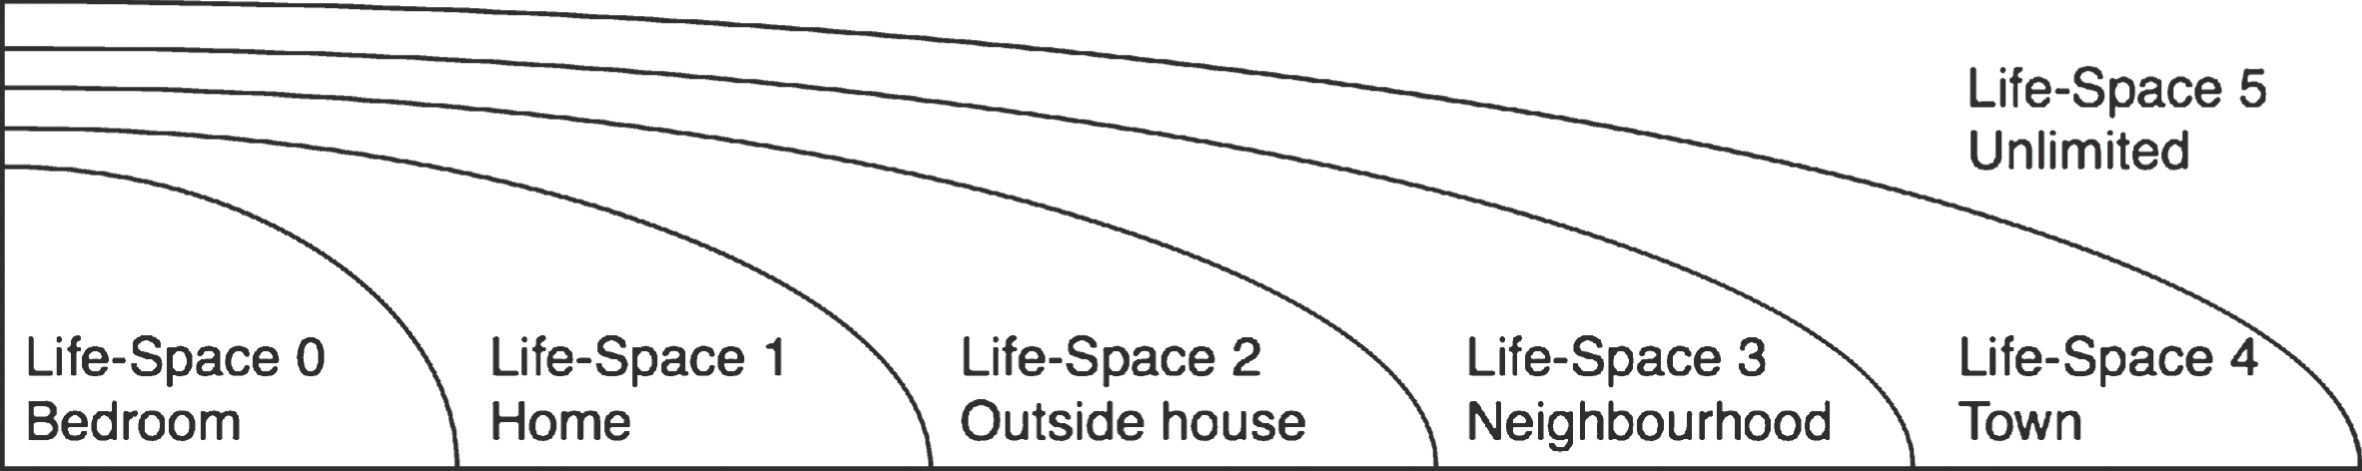 Life-space levels as proposed in [29]. Life-space of 0 is limited to the bedroom; Life-space of 1 is limited to the home of the person; Life-space of 2 is limited to the immediate outside of the home; Life-space of 3 is limited to the neighborhood; Life-space of 4 is limited to the town where the person is living; Life-space of 5 is unlimited.